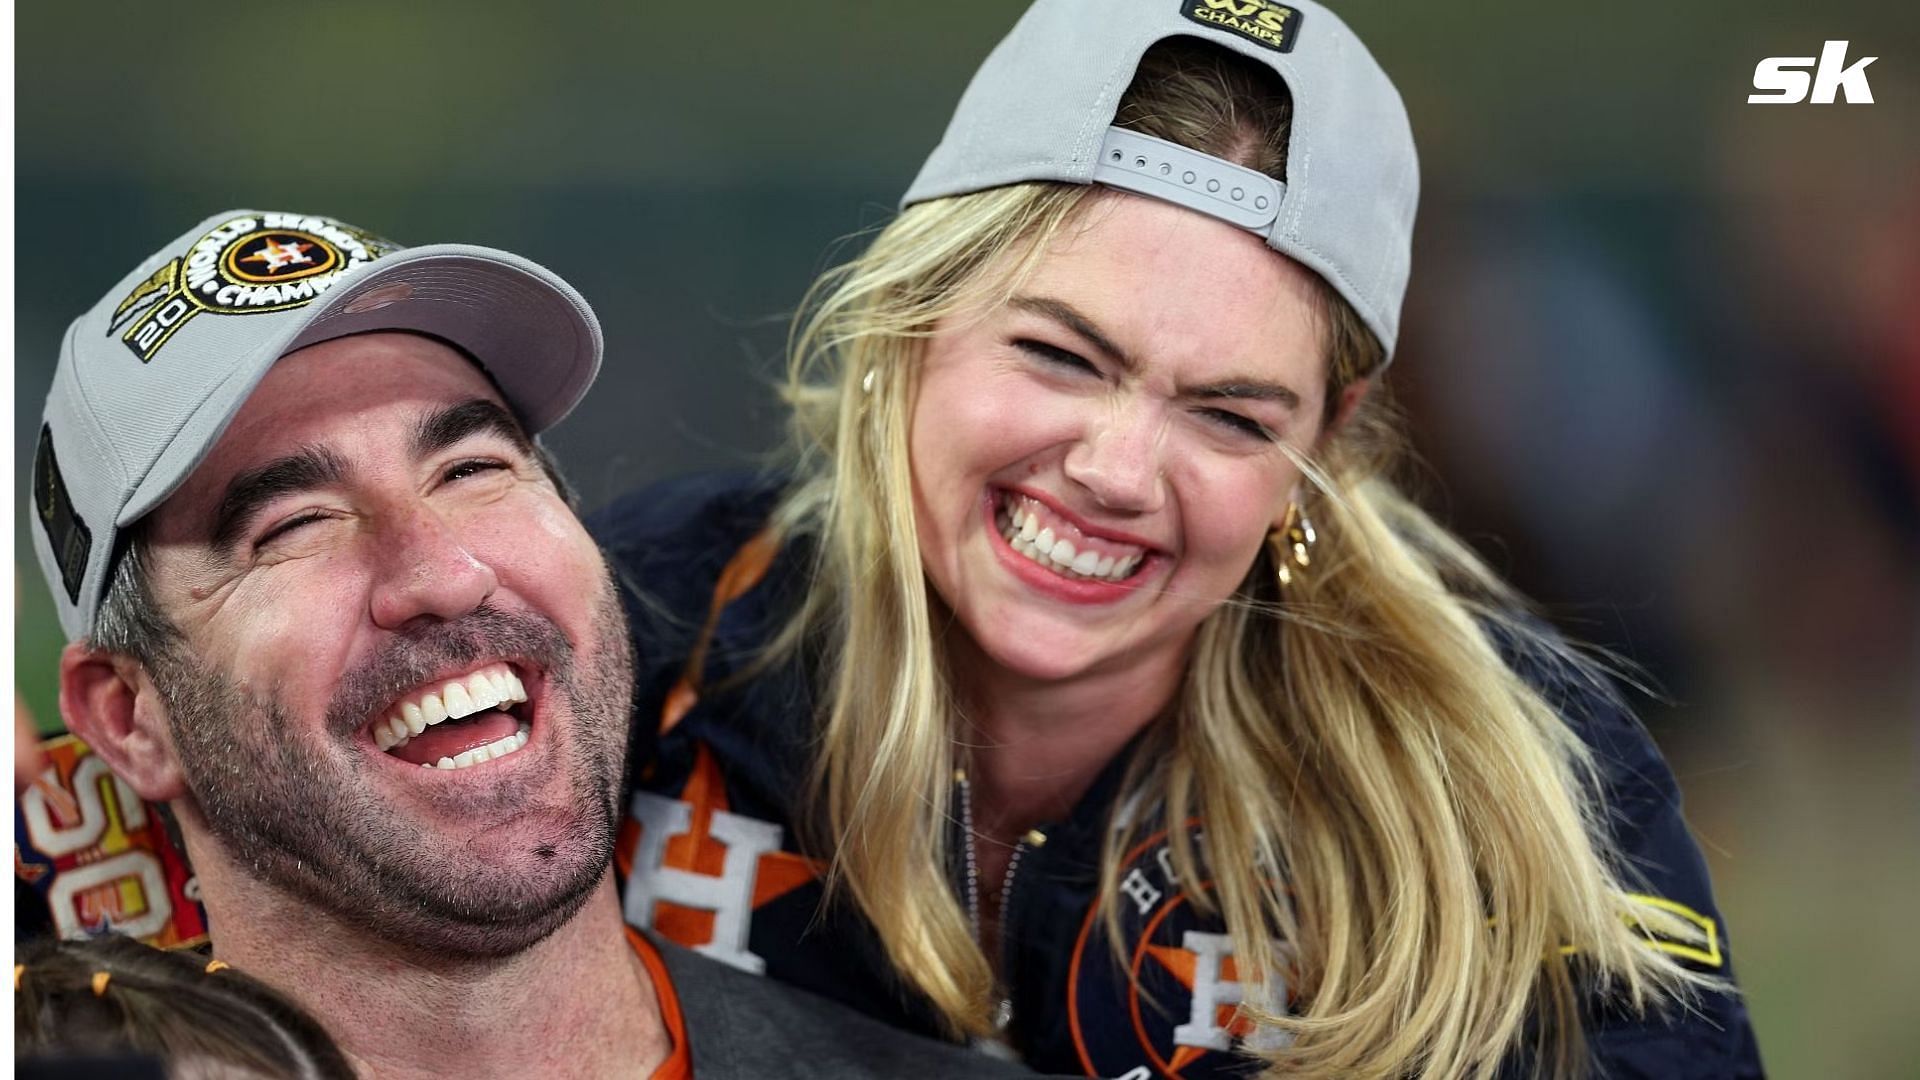 PHOTOS: Justin Verlander and Kate Upton are enjoying time together in St. Barts after former Astros flamethrower signed with New York Mets